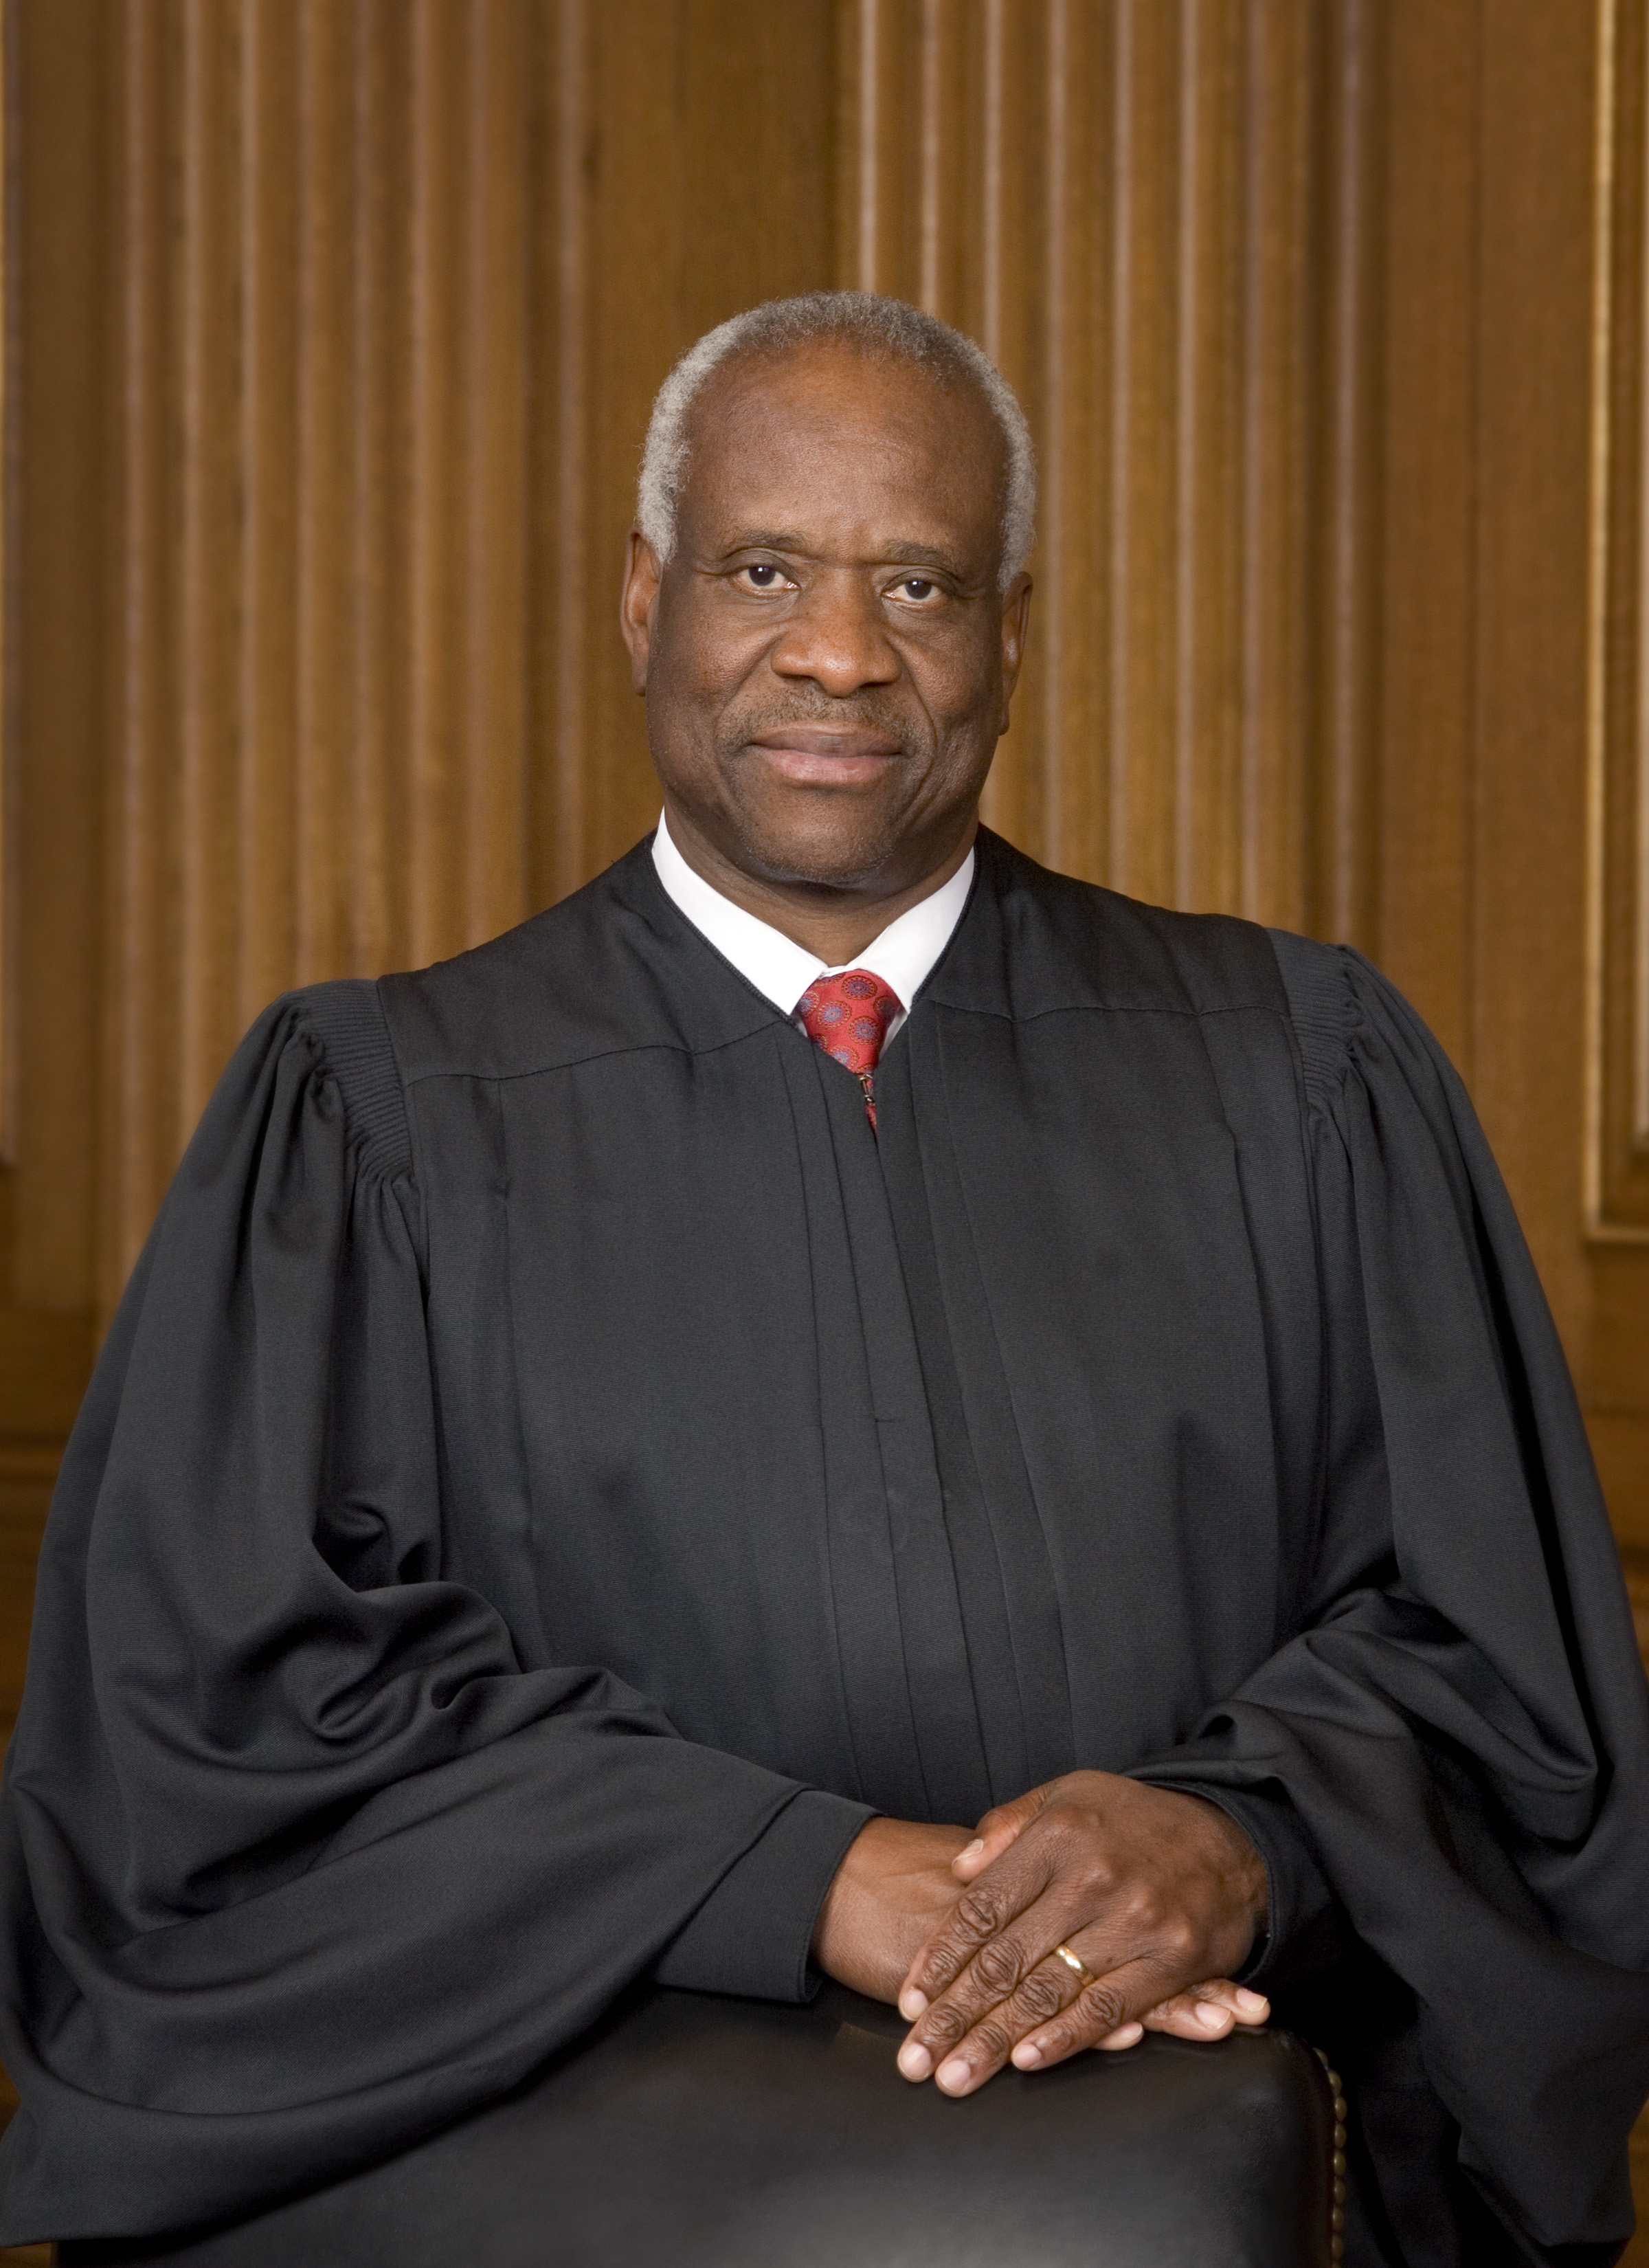 Justice Clarence Thomas, 2007.